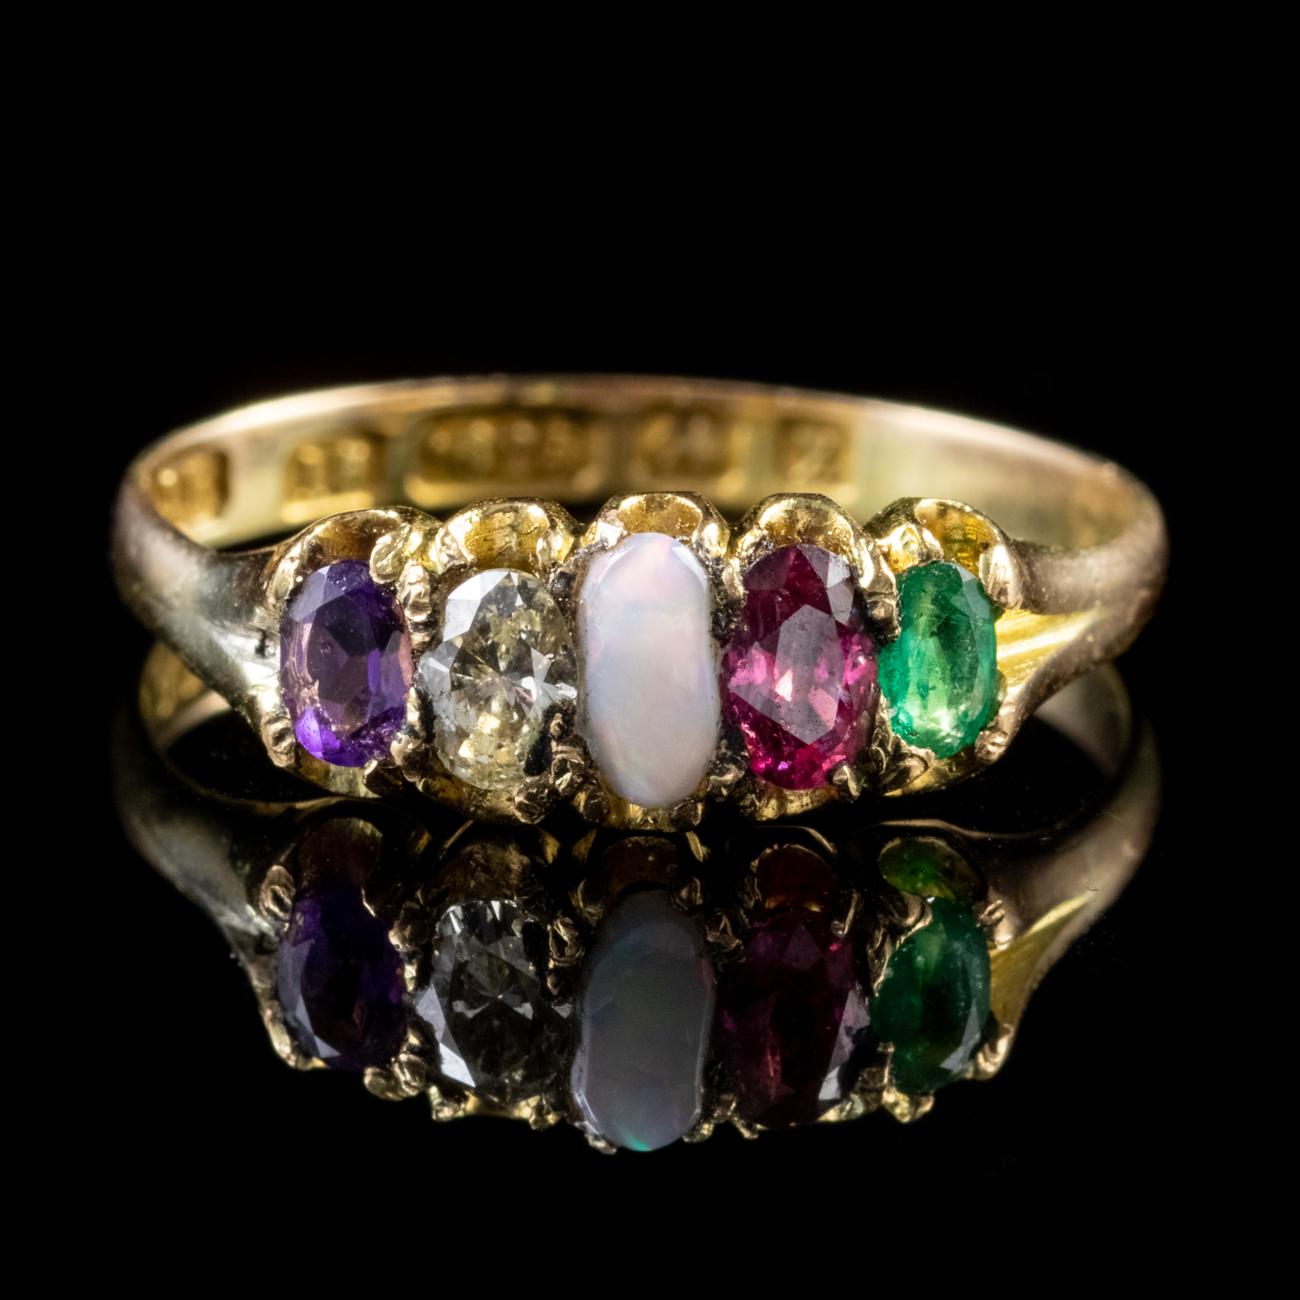 This beautiful Antique Victorian Adore ring has been commissioned in 15ct Yellow Gold and comes fully hallmarked.

The ring features five claw set gemstones which from left to right are an Amethyst (approx. 0.10ct), a Diamond (approx. 0.15ct), an